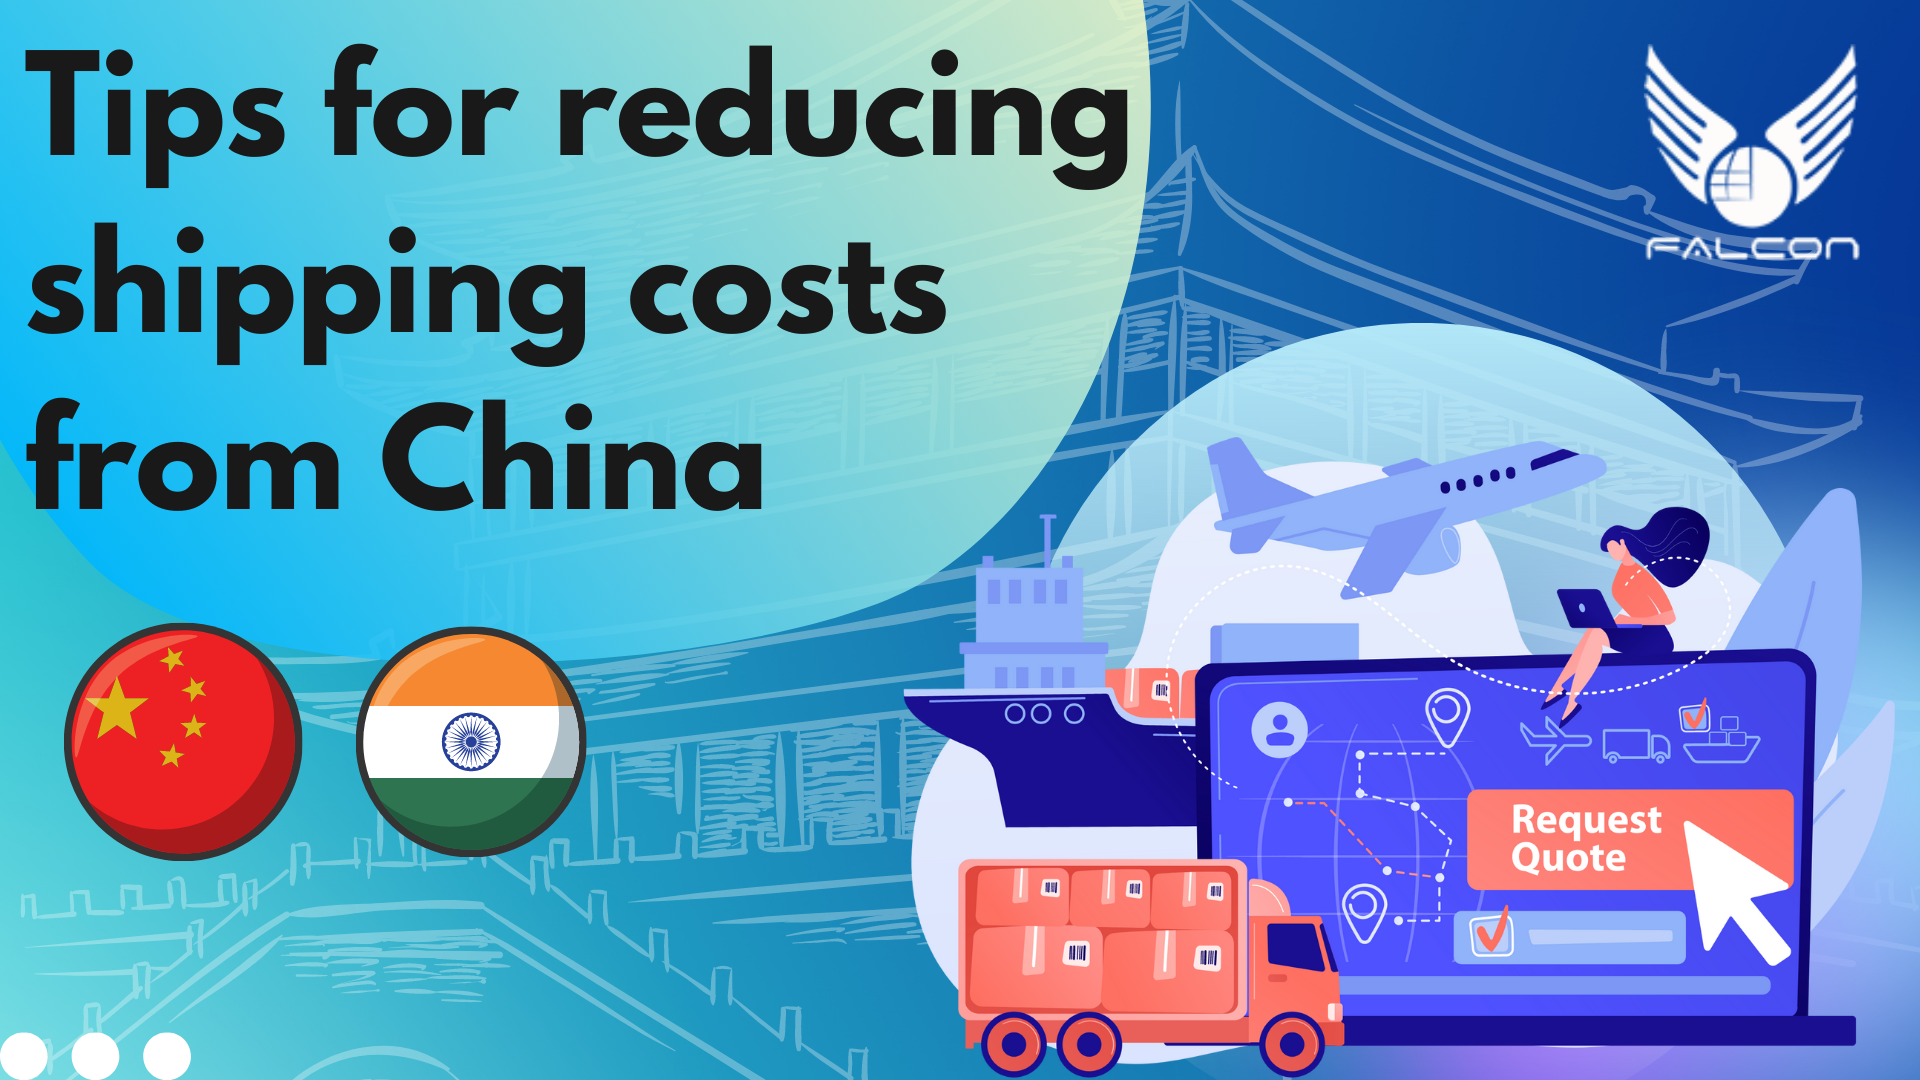 Tips for Reducing Shipping Costs from China